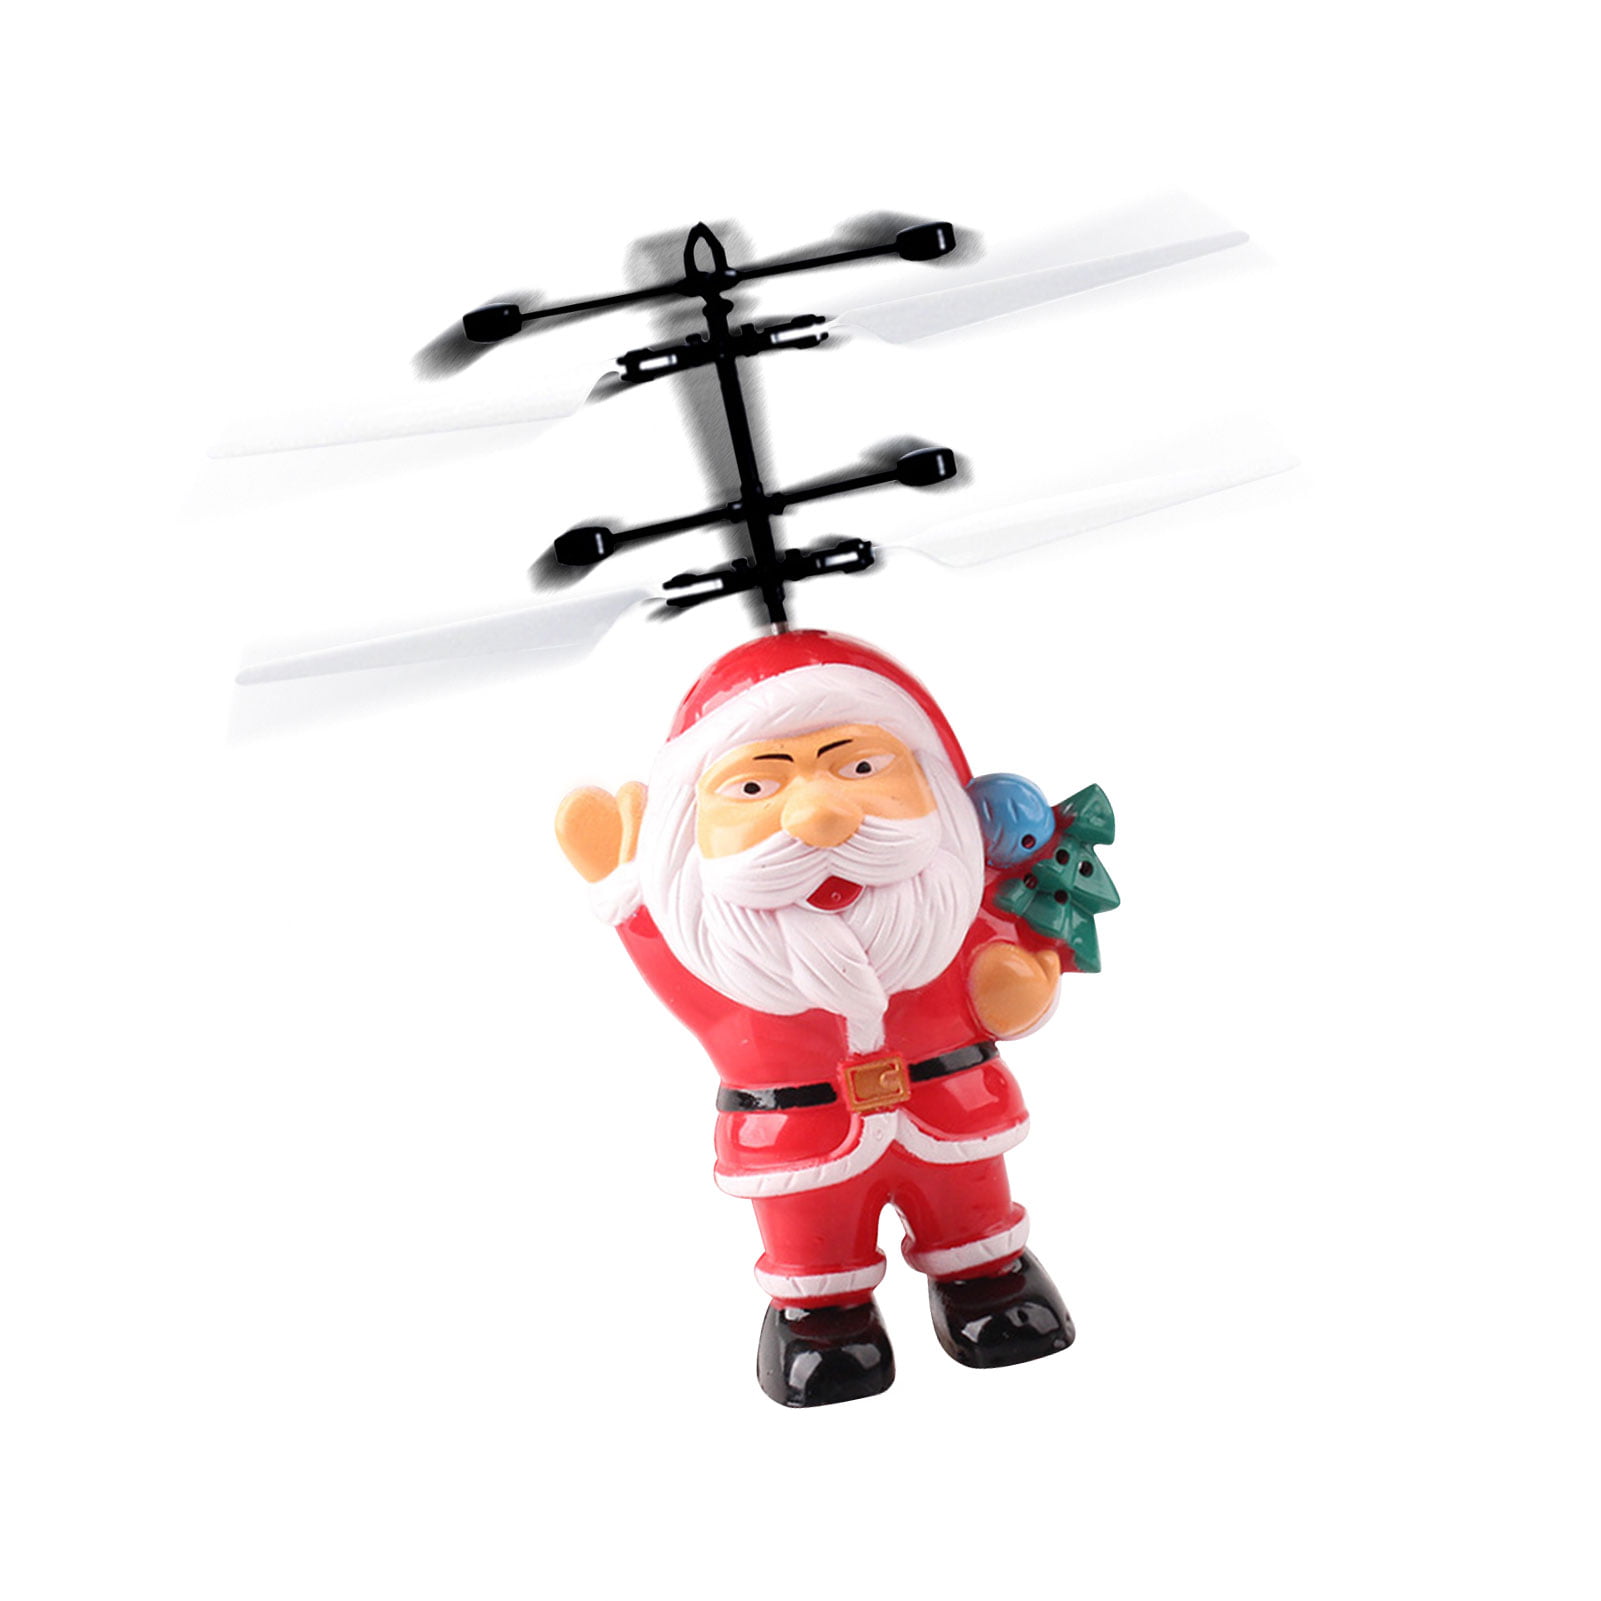 RC FLYING SANTA CLAUSE Christmas Toy W/ Controller w/ Lights 